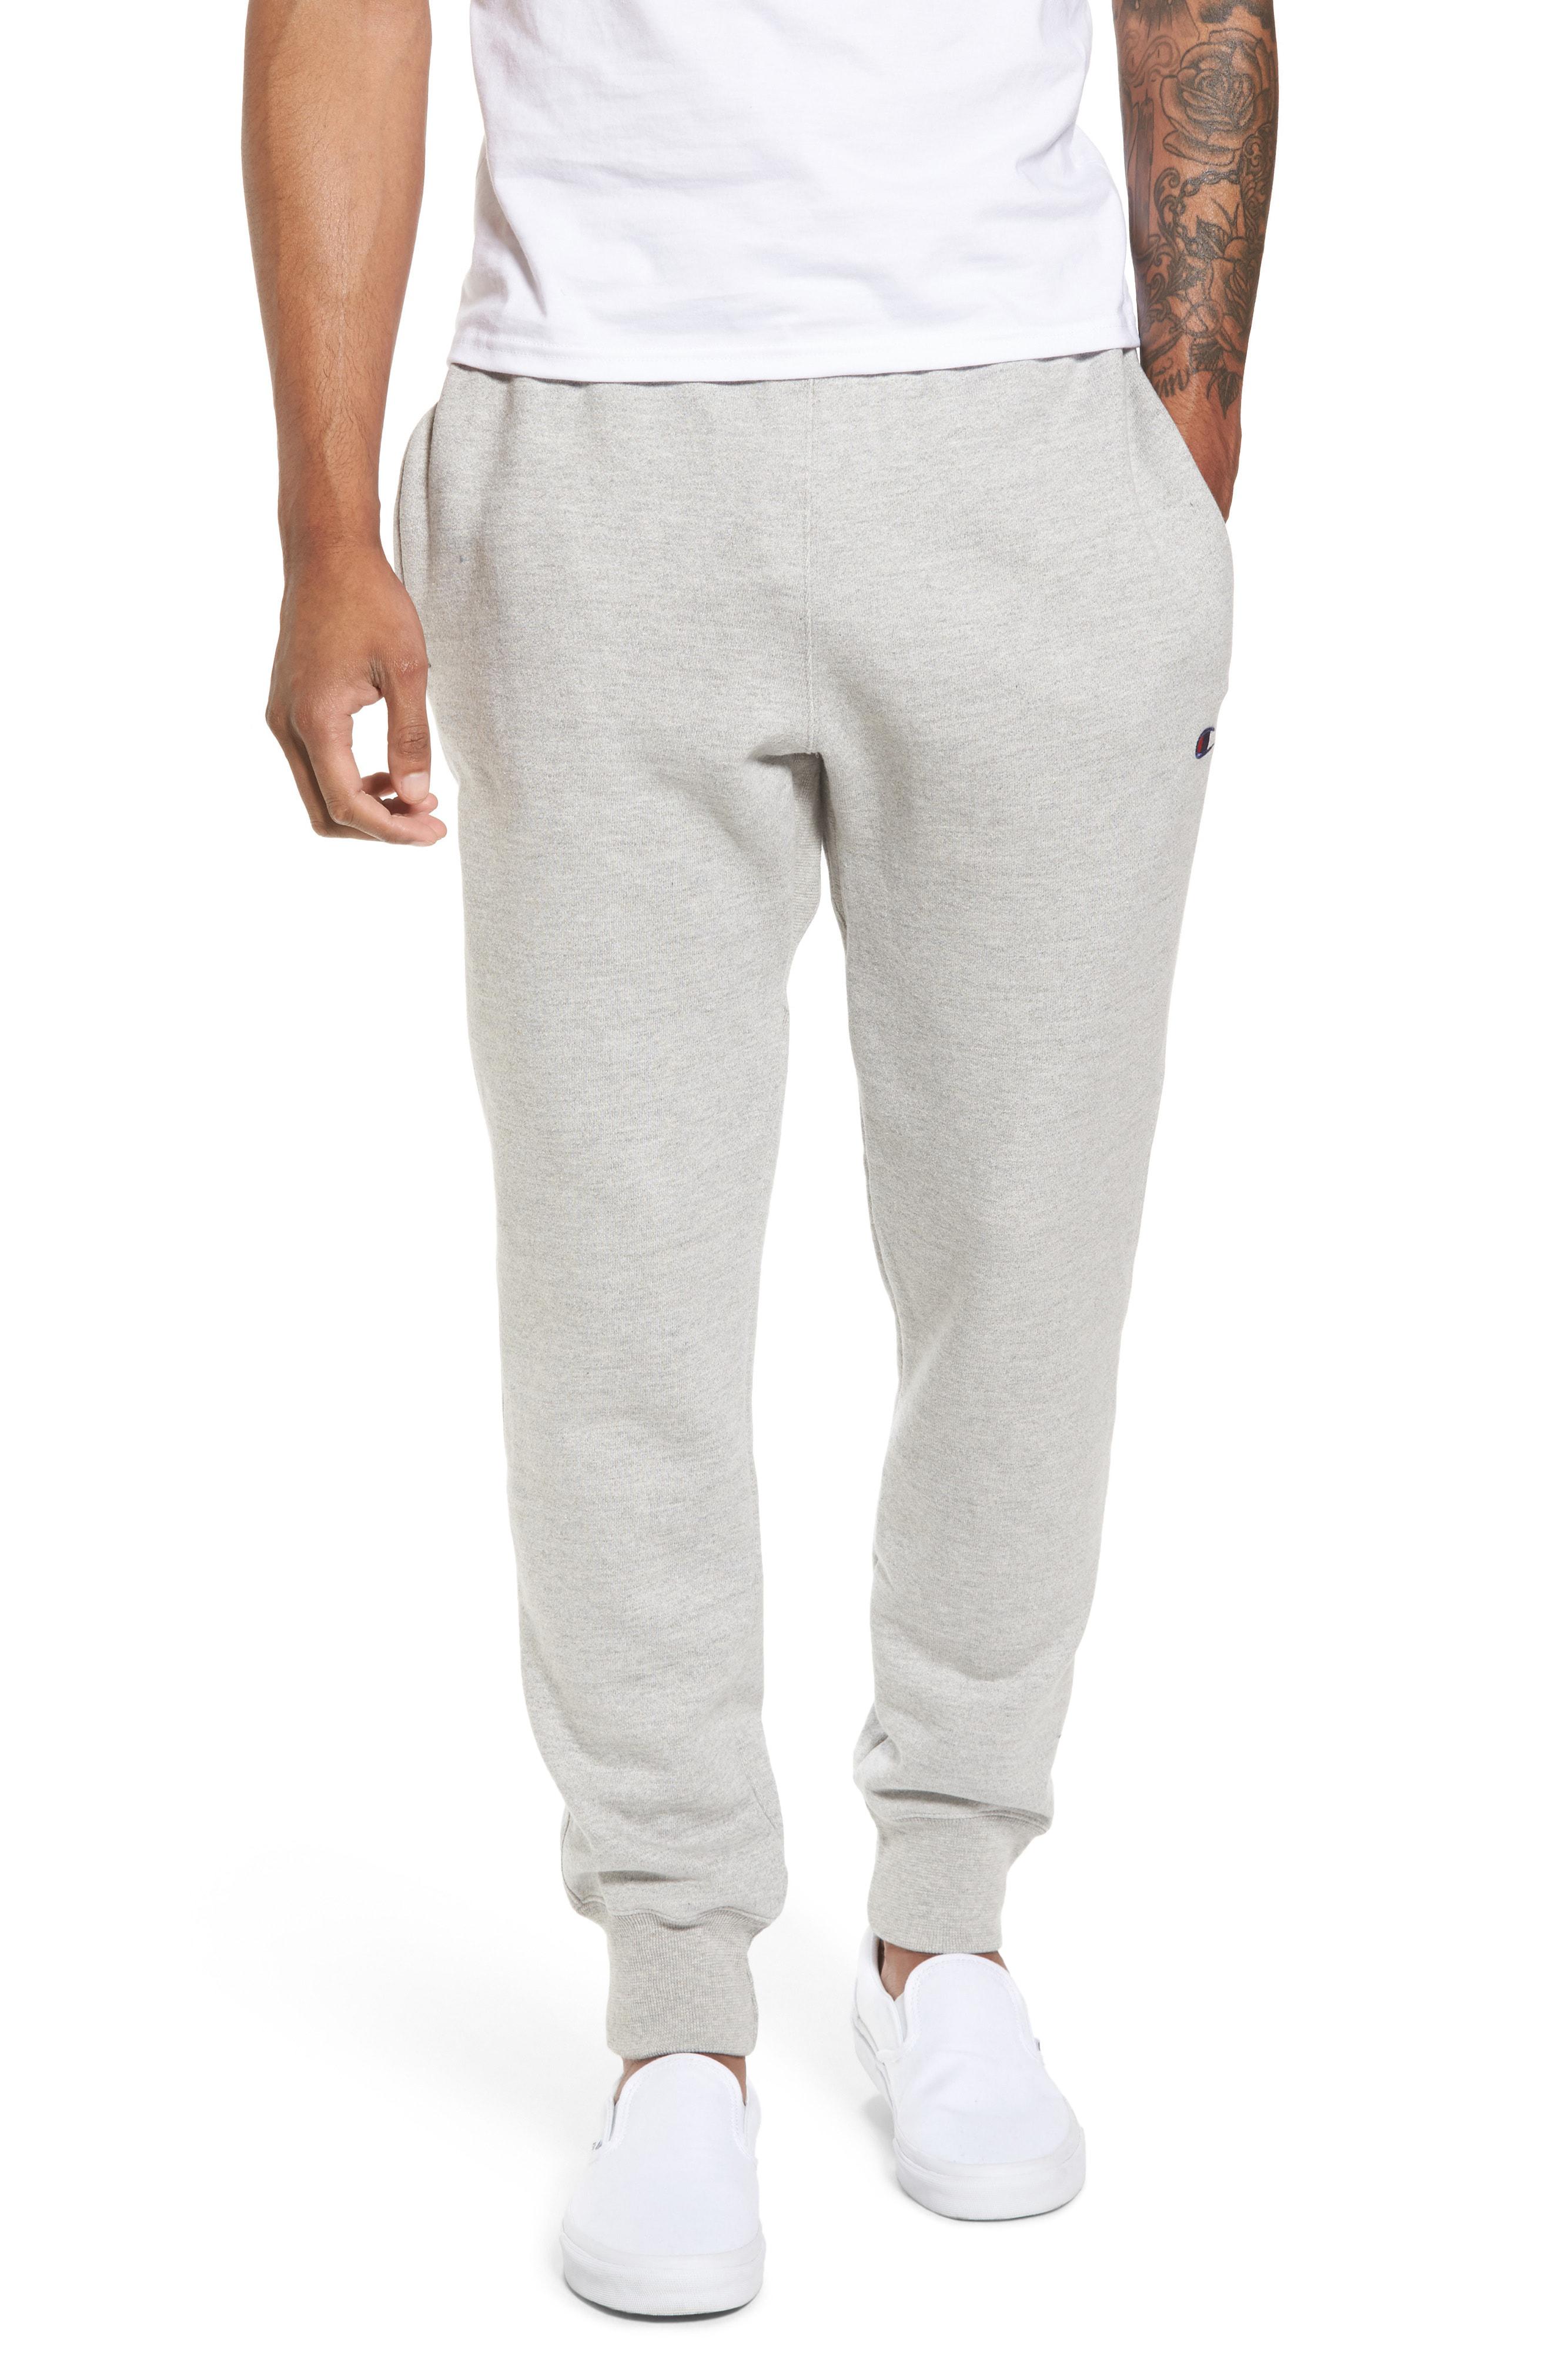 Lyst - Champion Reverse Weave Jogger Pants in Gray for Men